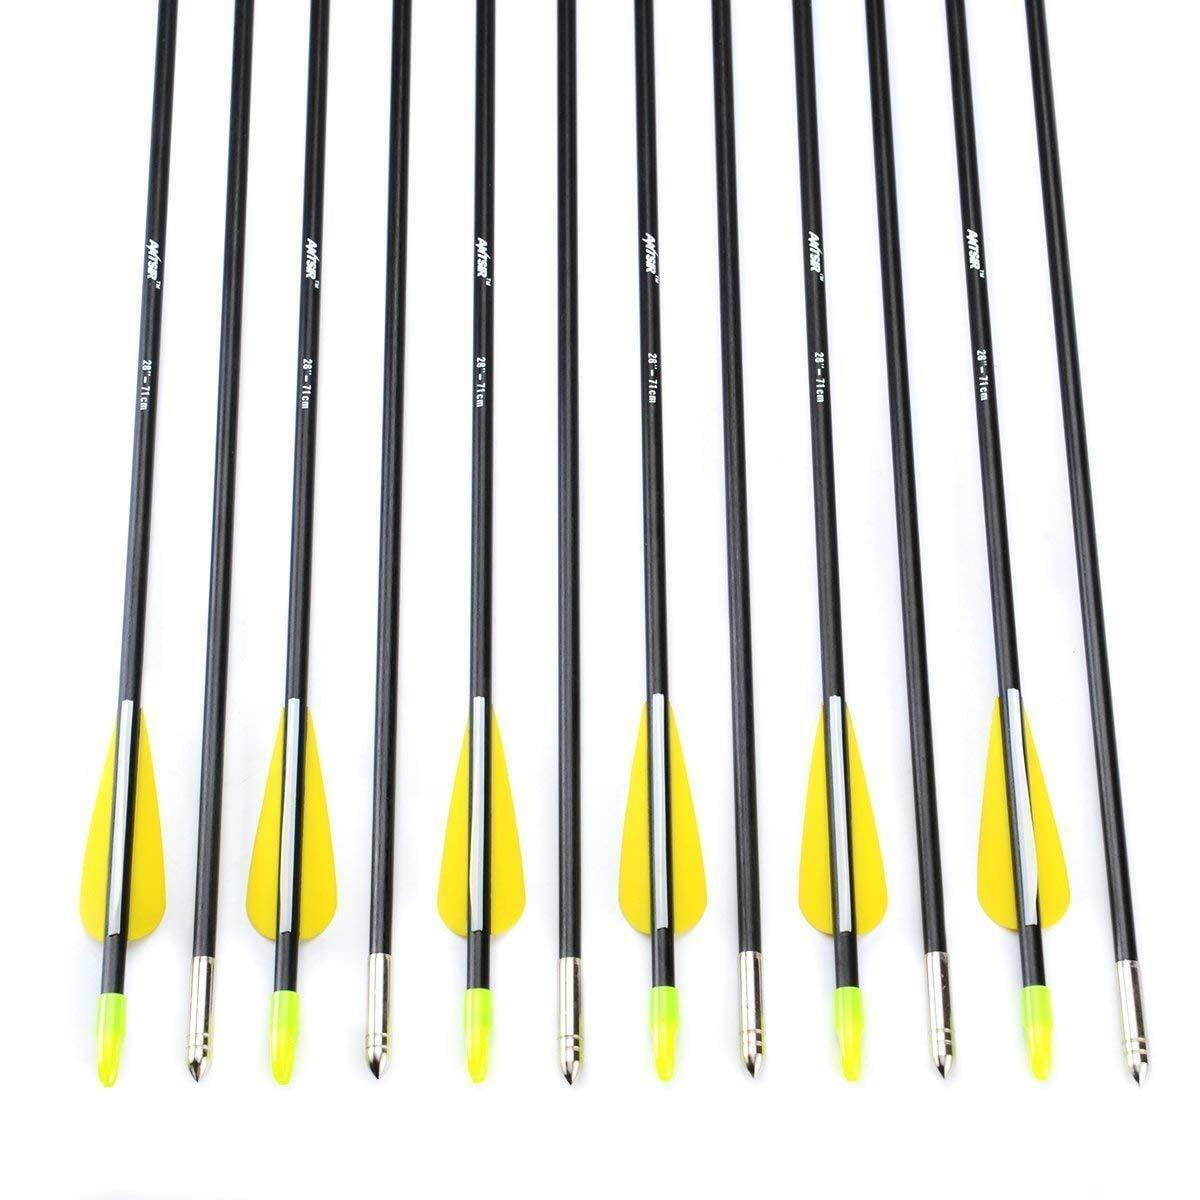 6/12x 28" Archery Fiberglass Arrows with 3"Vanes for Hunting Targeting Practice 